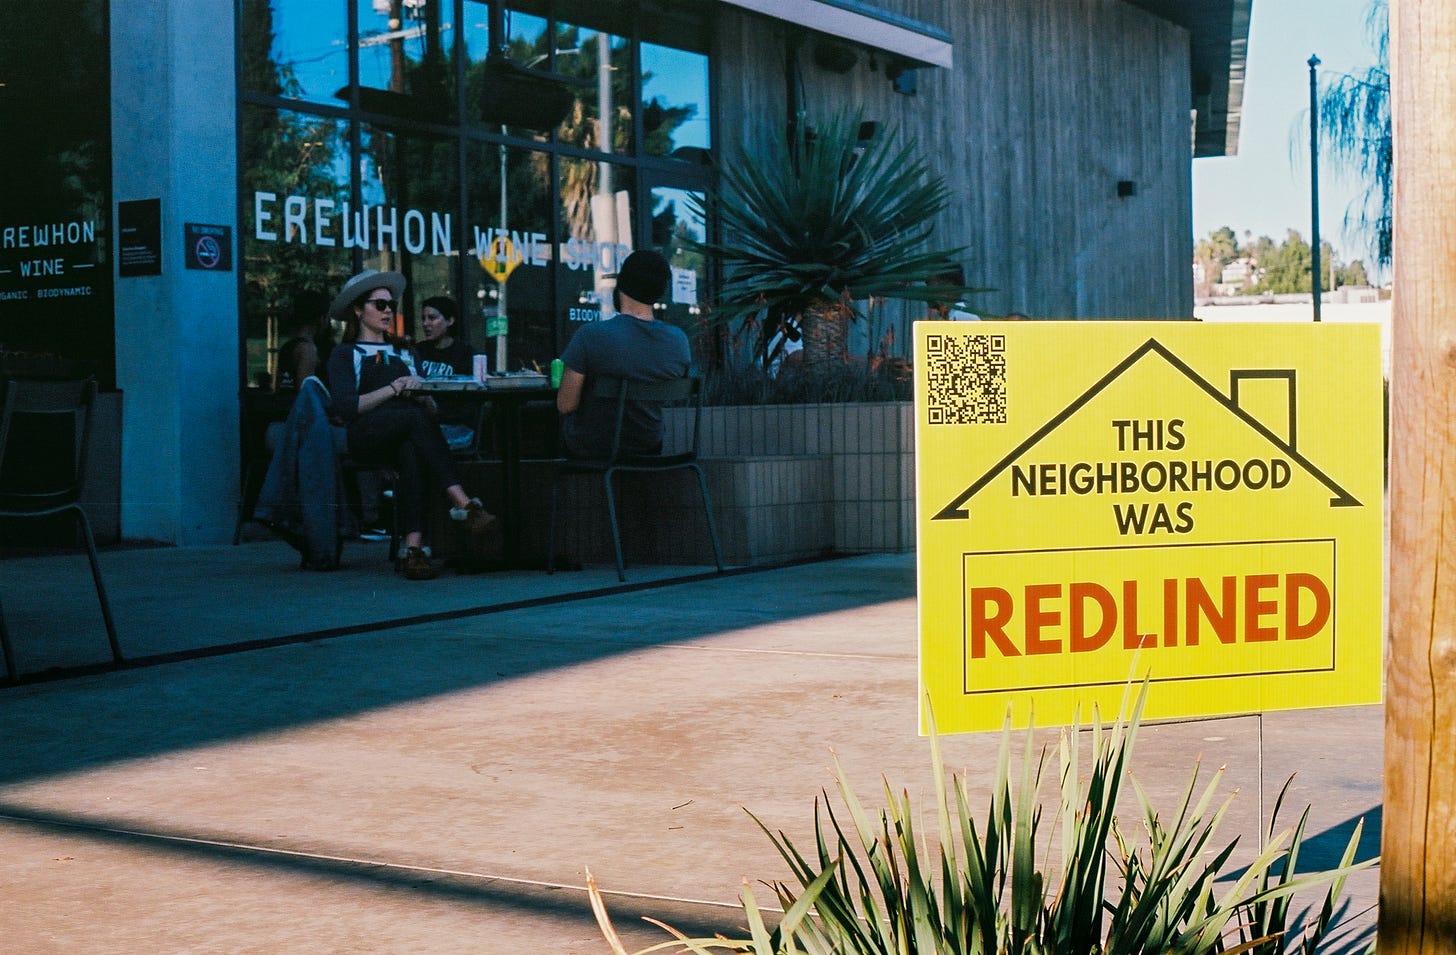 Photograph of the high end grocery store Erewhon in the background with patrons dining at outdoor tables and one of my yard signs in the foreground. 